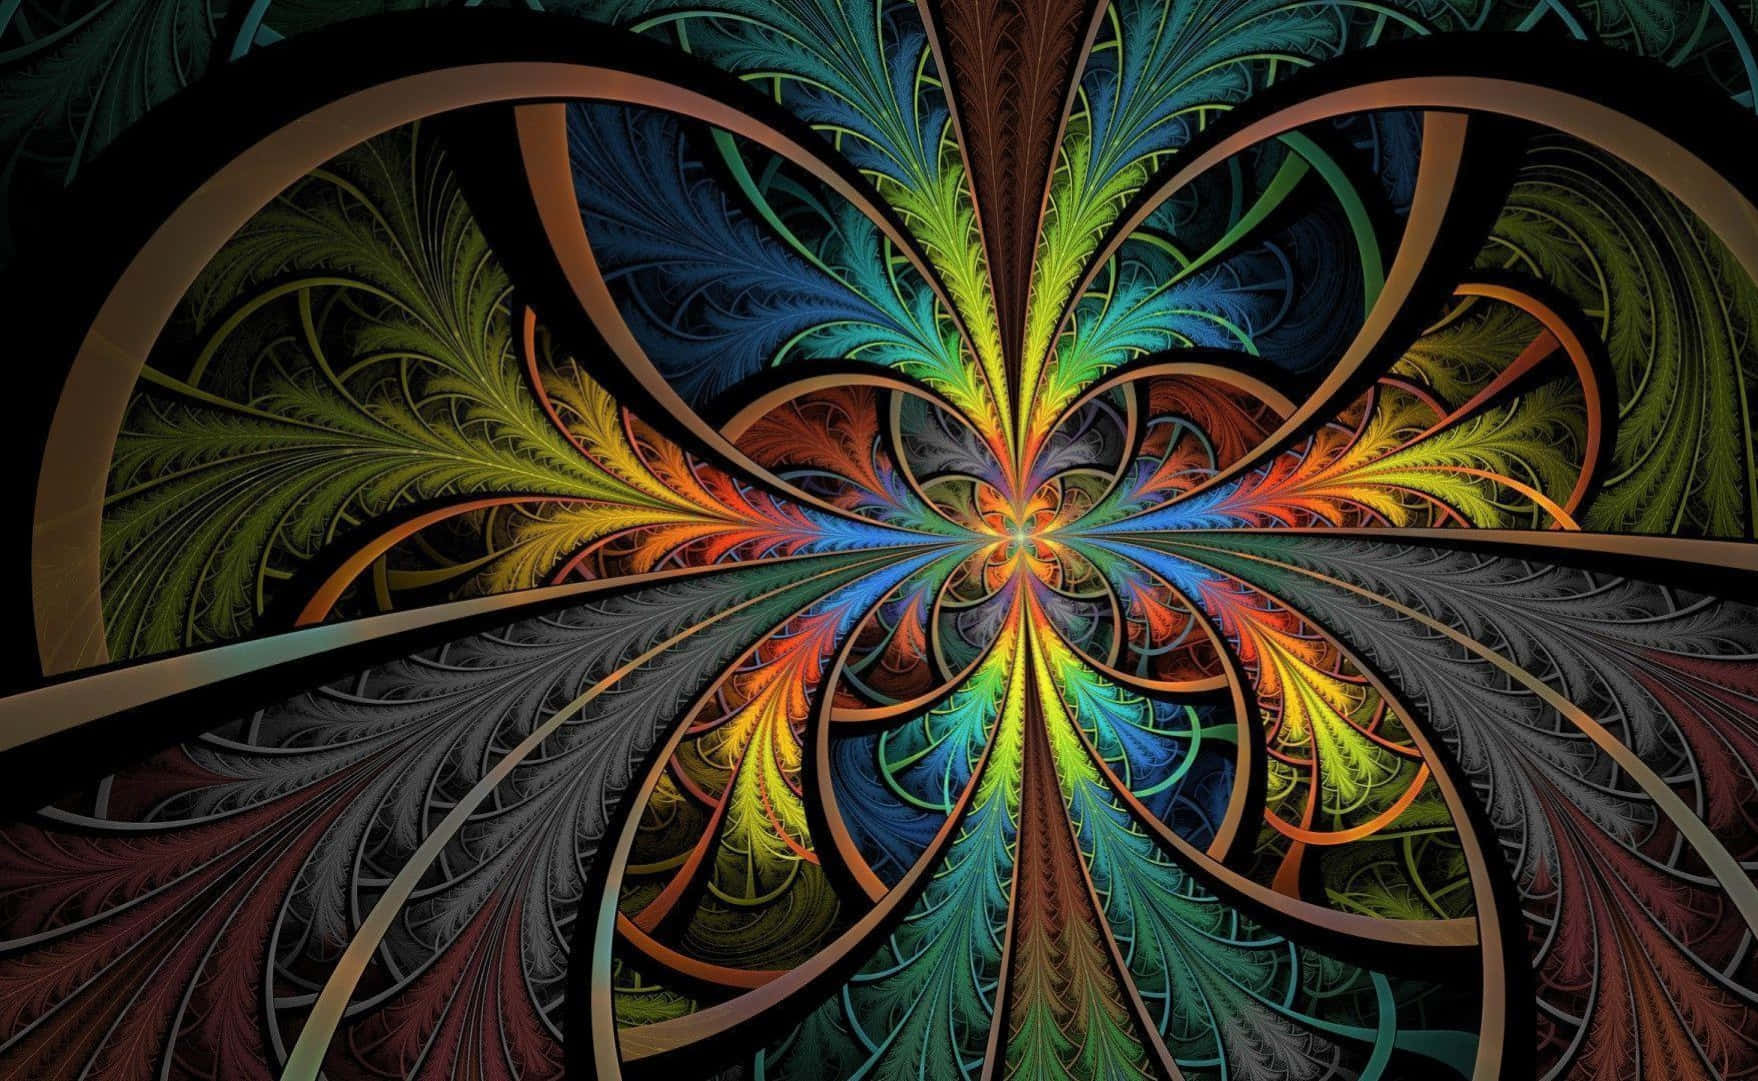 Exploring New Worlds of Psychedelic Art